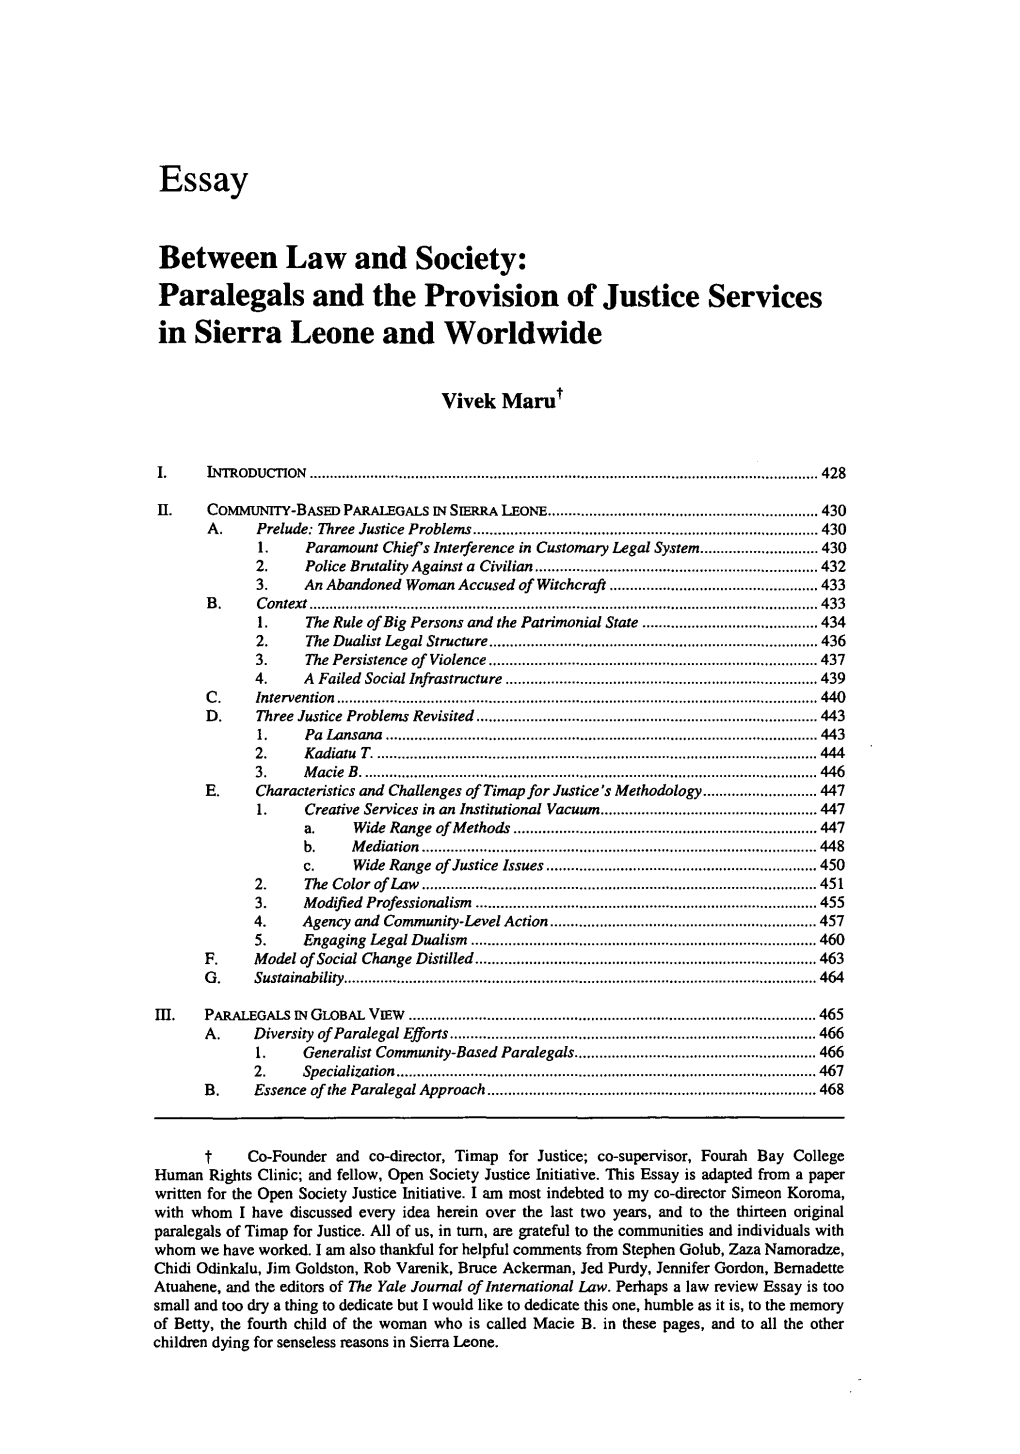 Between Law and Society: Paralegals and the Provision of Justice Services in Sierra Leone and Worldwide